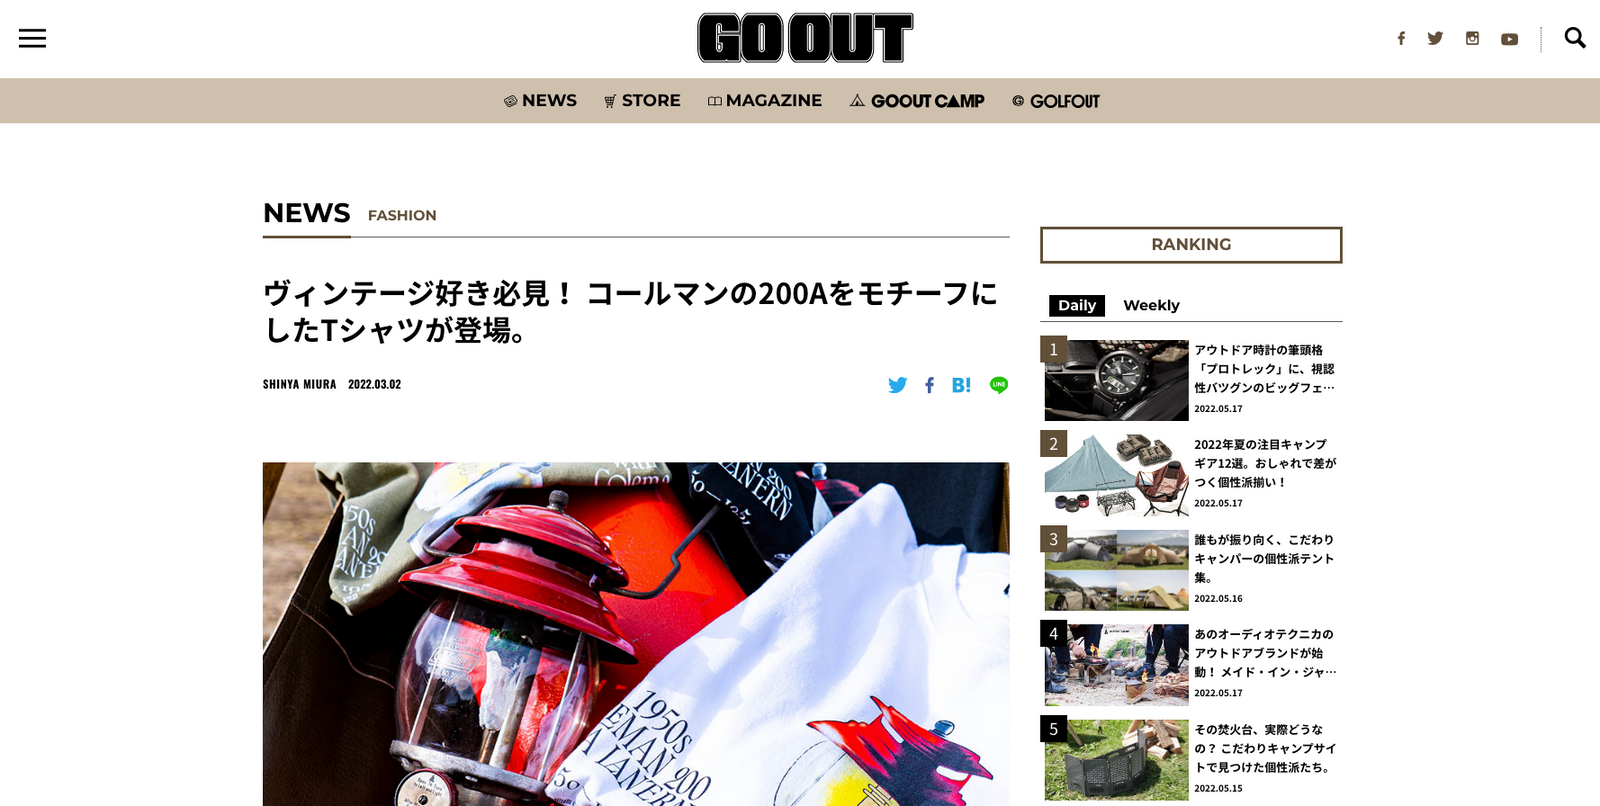 『GO OUT WEB』 2022.03.02 Wed Published